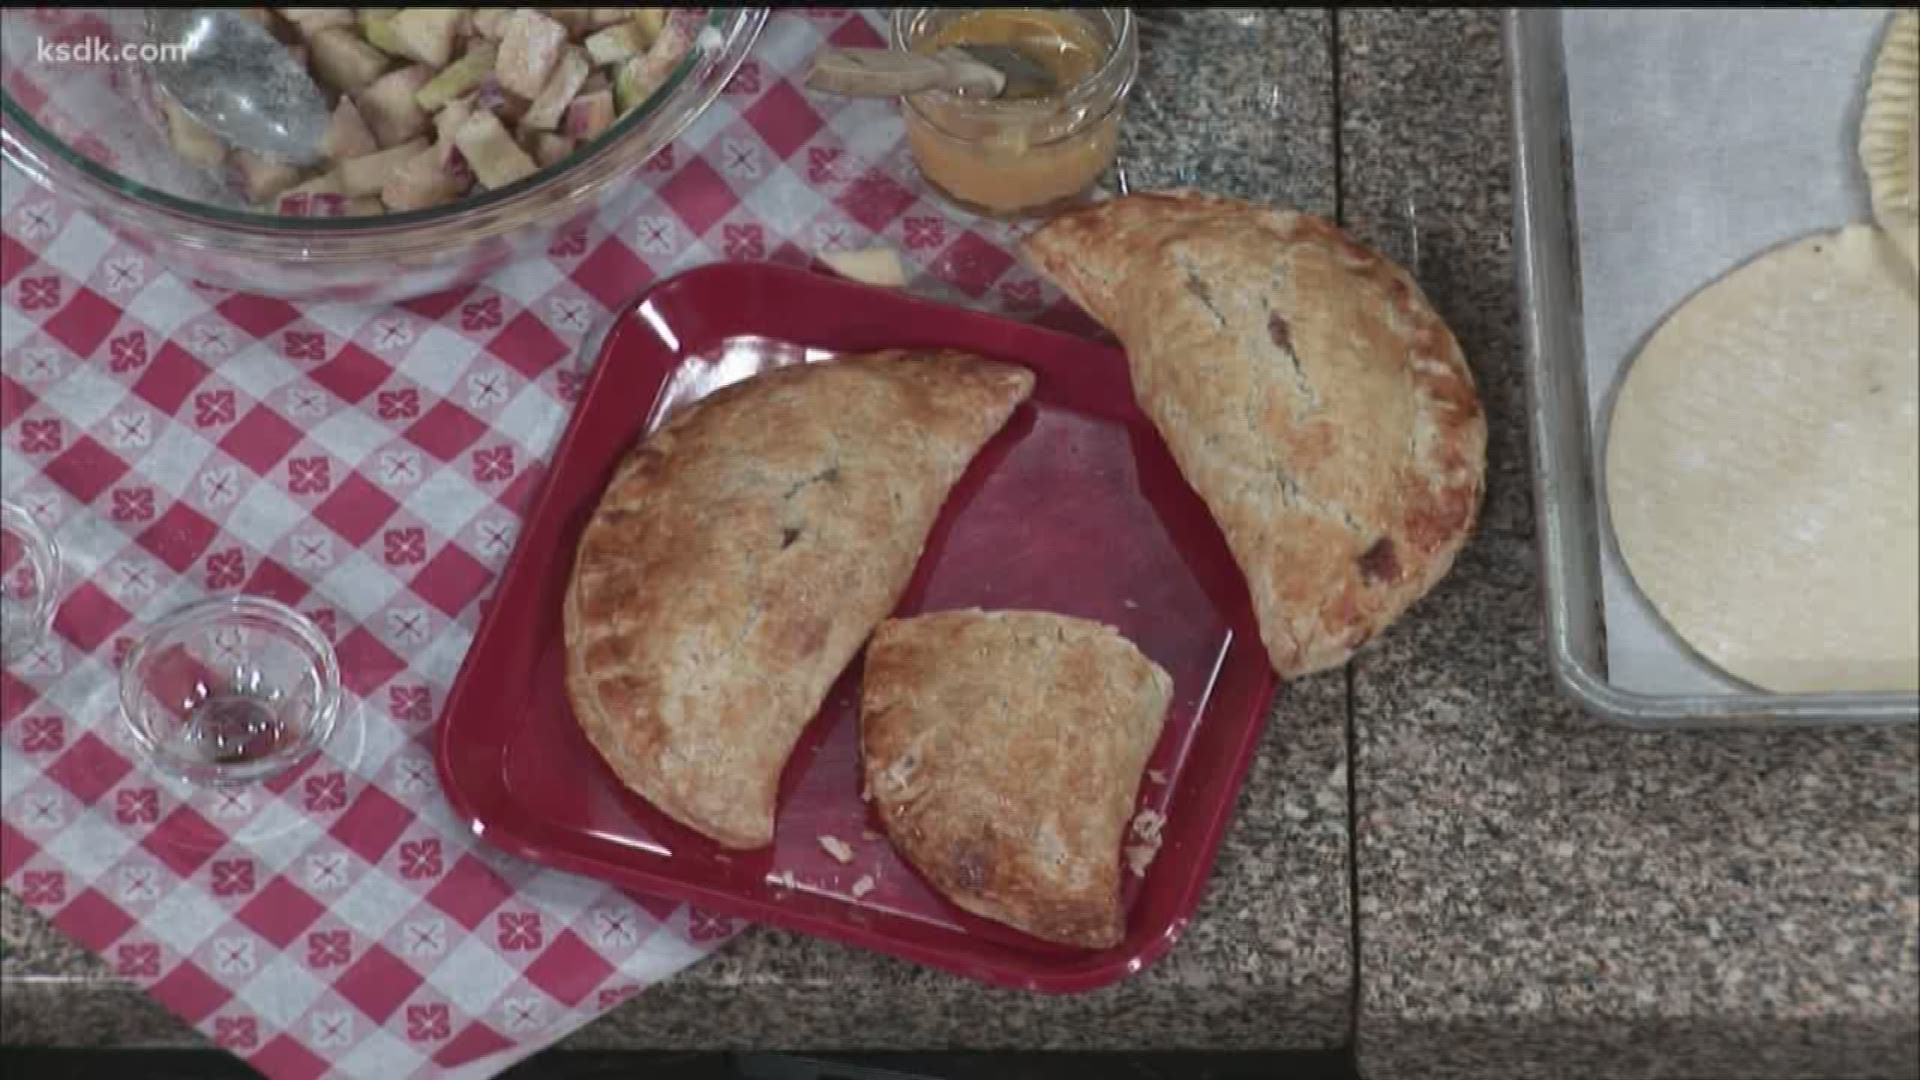 It’s apple pickin’ season! Angie Eckert of Eckert’s Farms showcased a way you can put those apples to use.